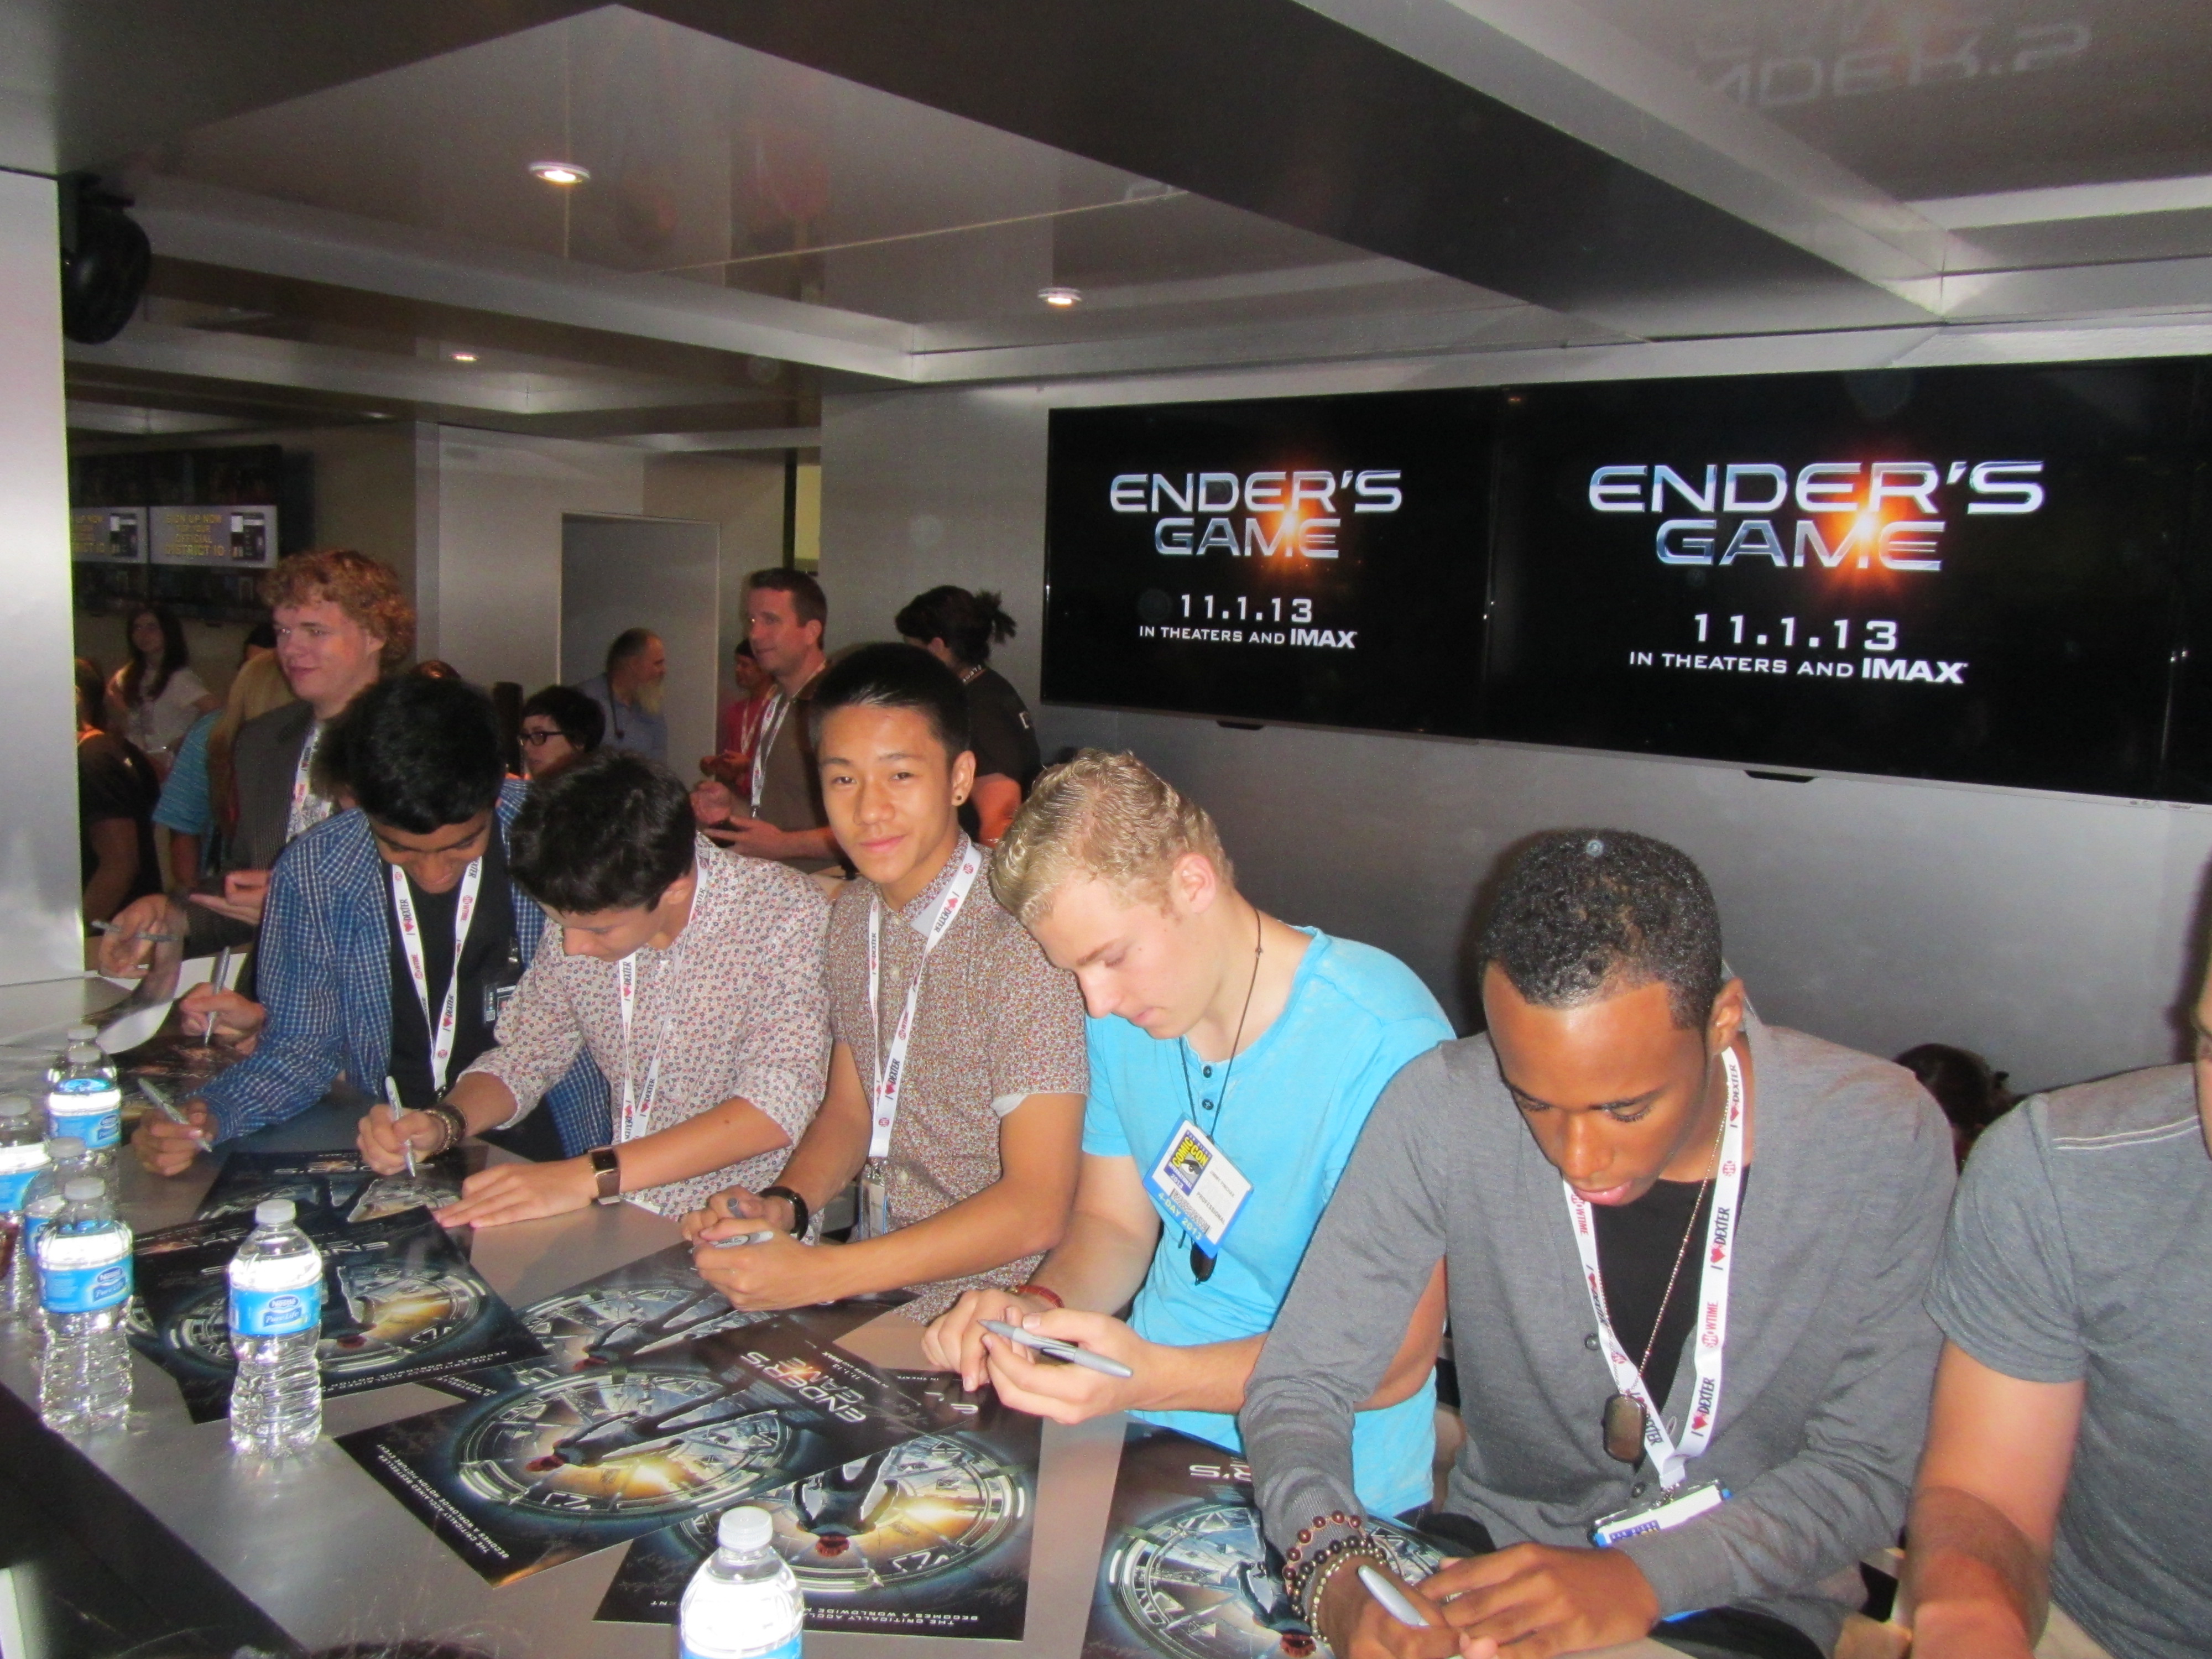 Brandon Soo Hoo and Ender's Game Cast at Comic-Con 07/20/2013